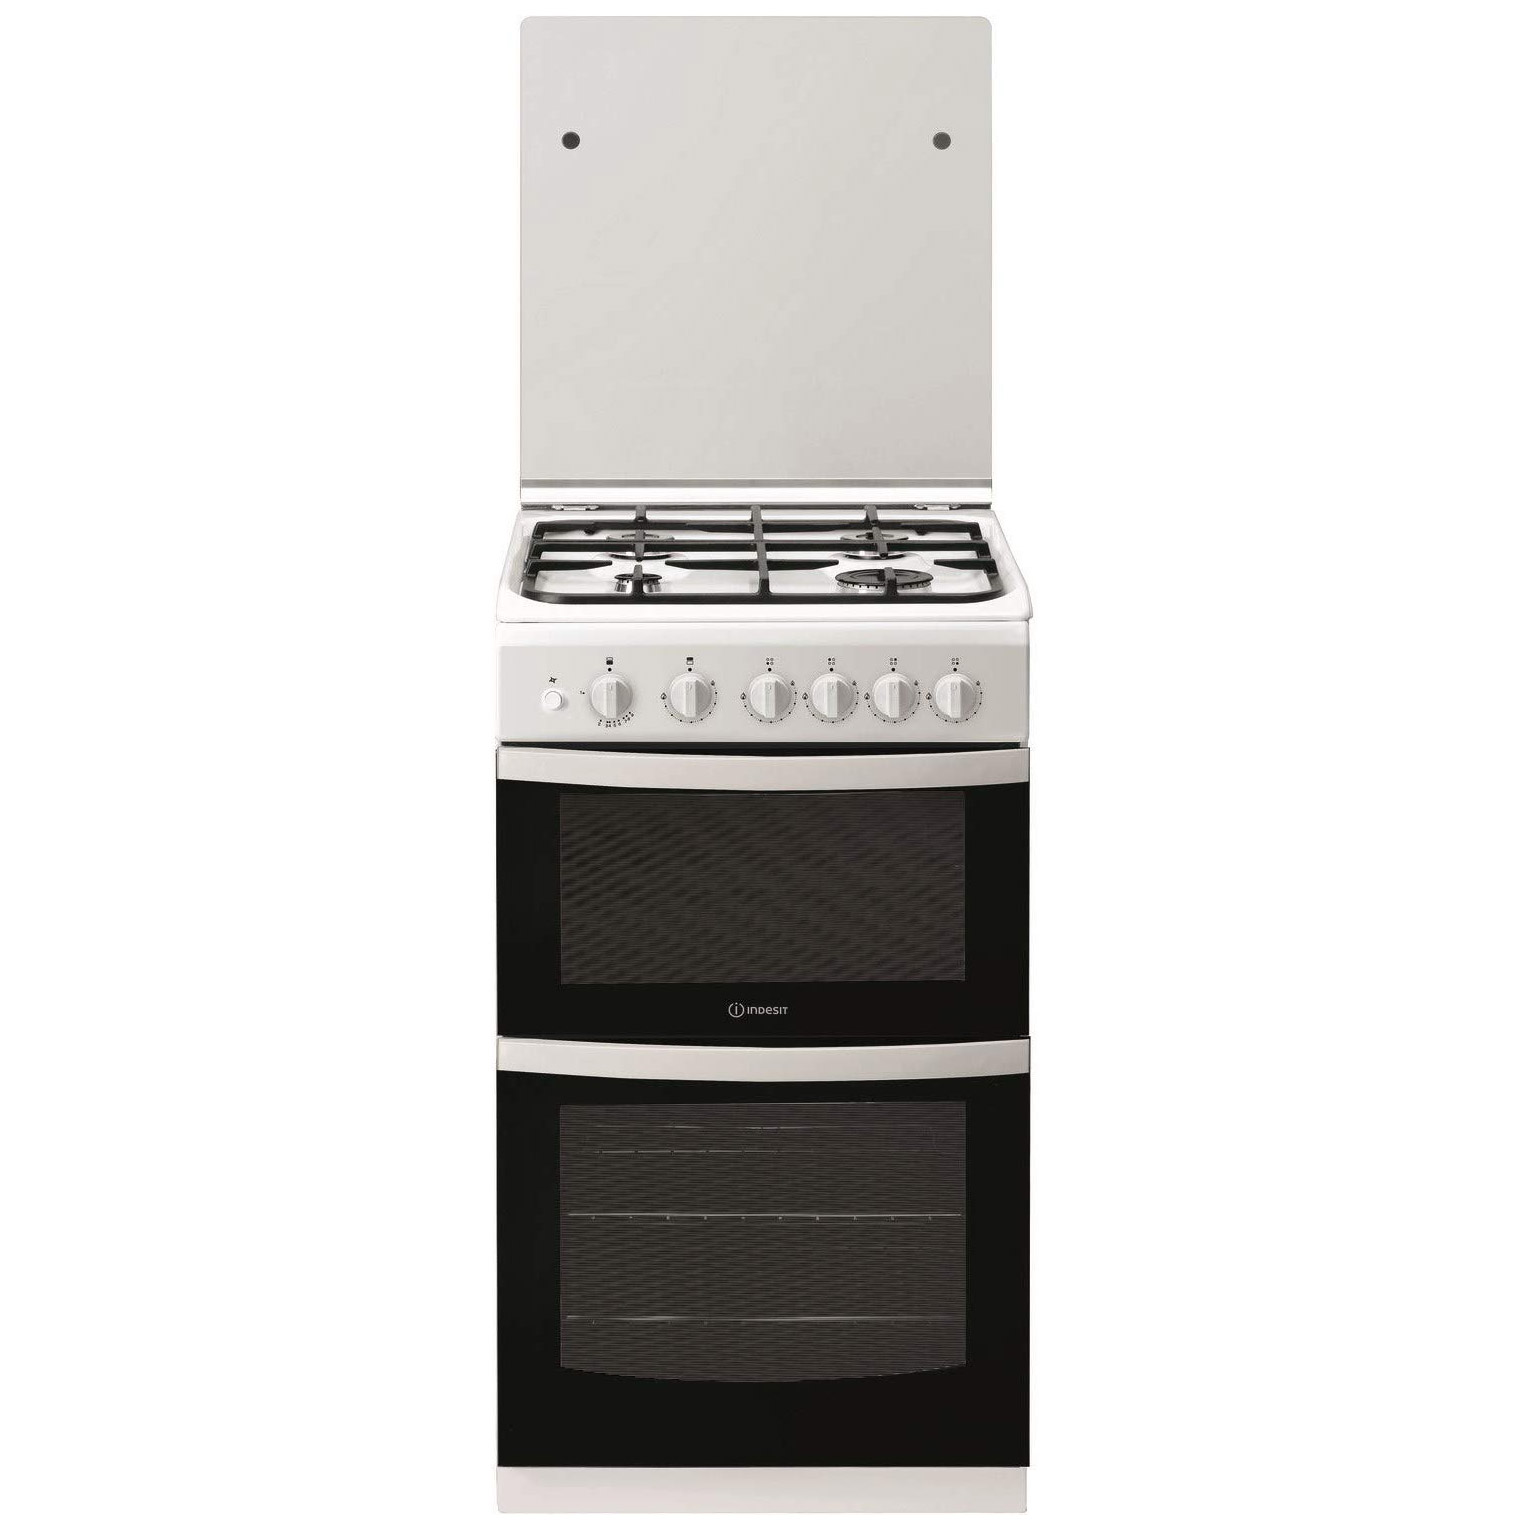 Image of Indesit ID5G00KMWL 50cm Twin Cavity Gas Cooker in White Glass Lid